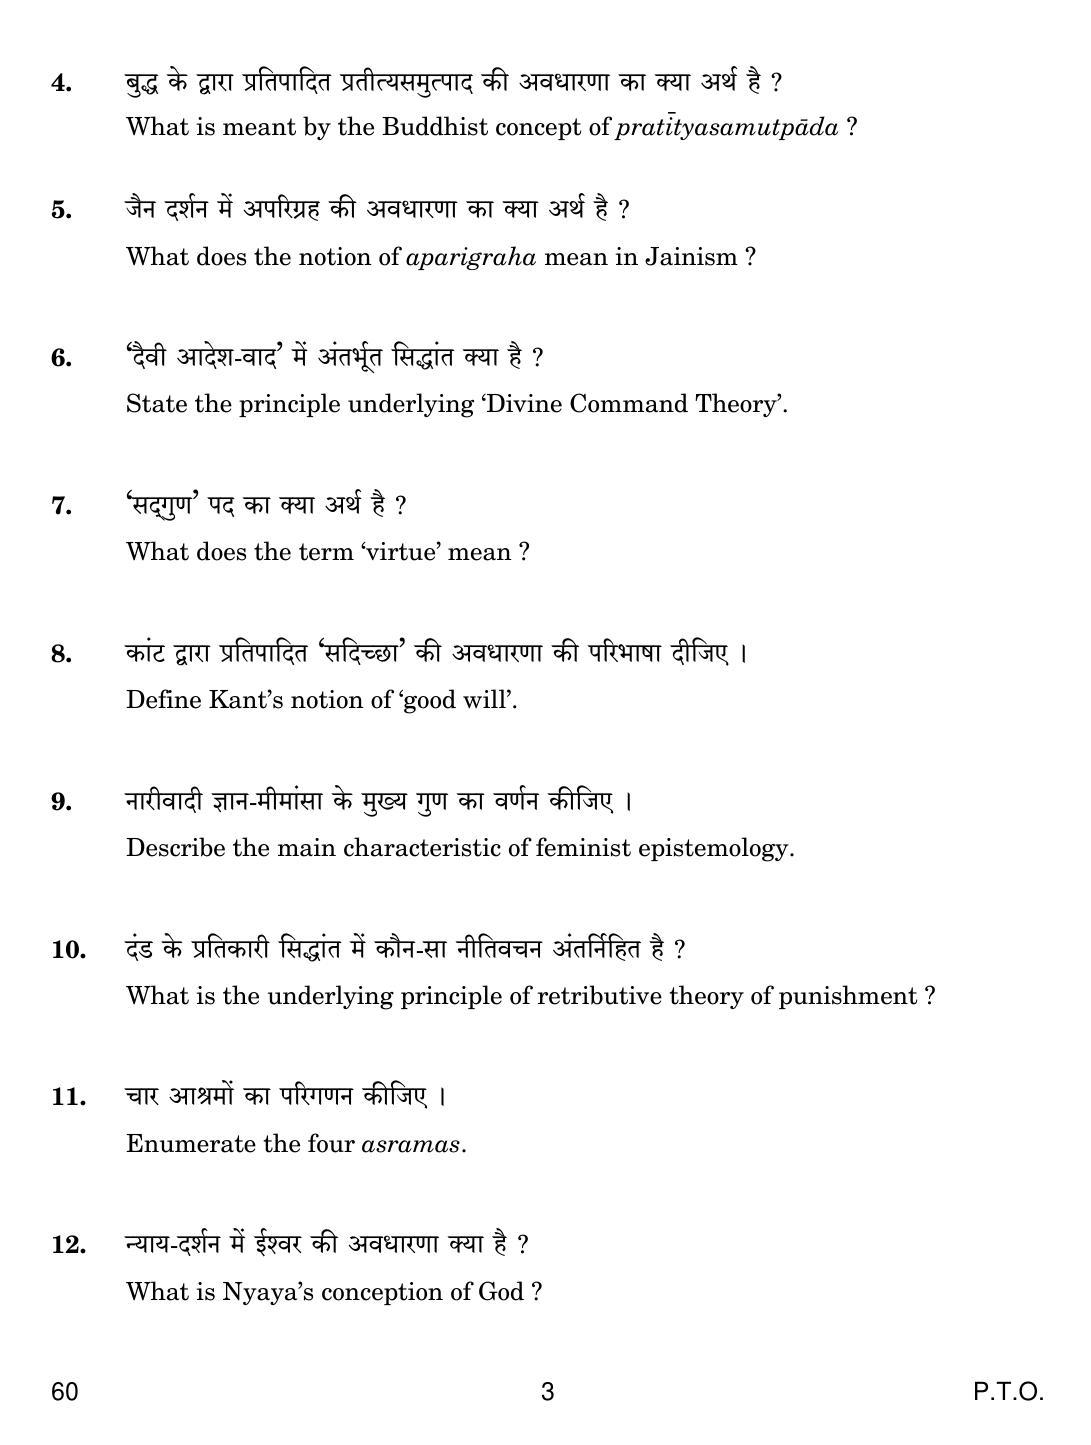 CBSE Class 12 60 Philosophy 2019 Question Paper - Page 3